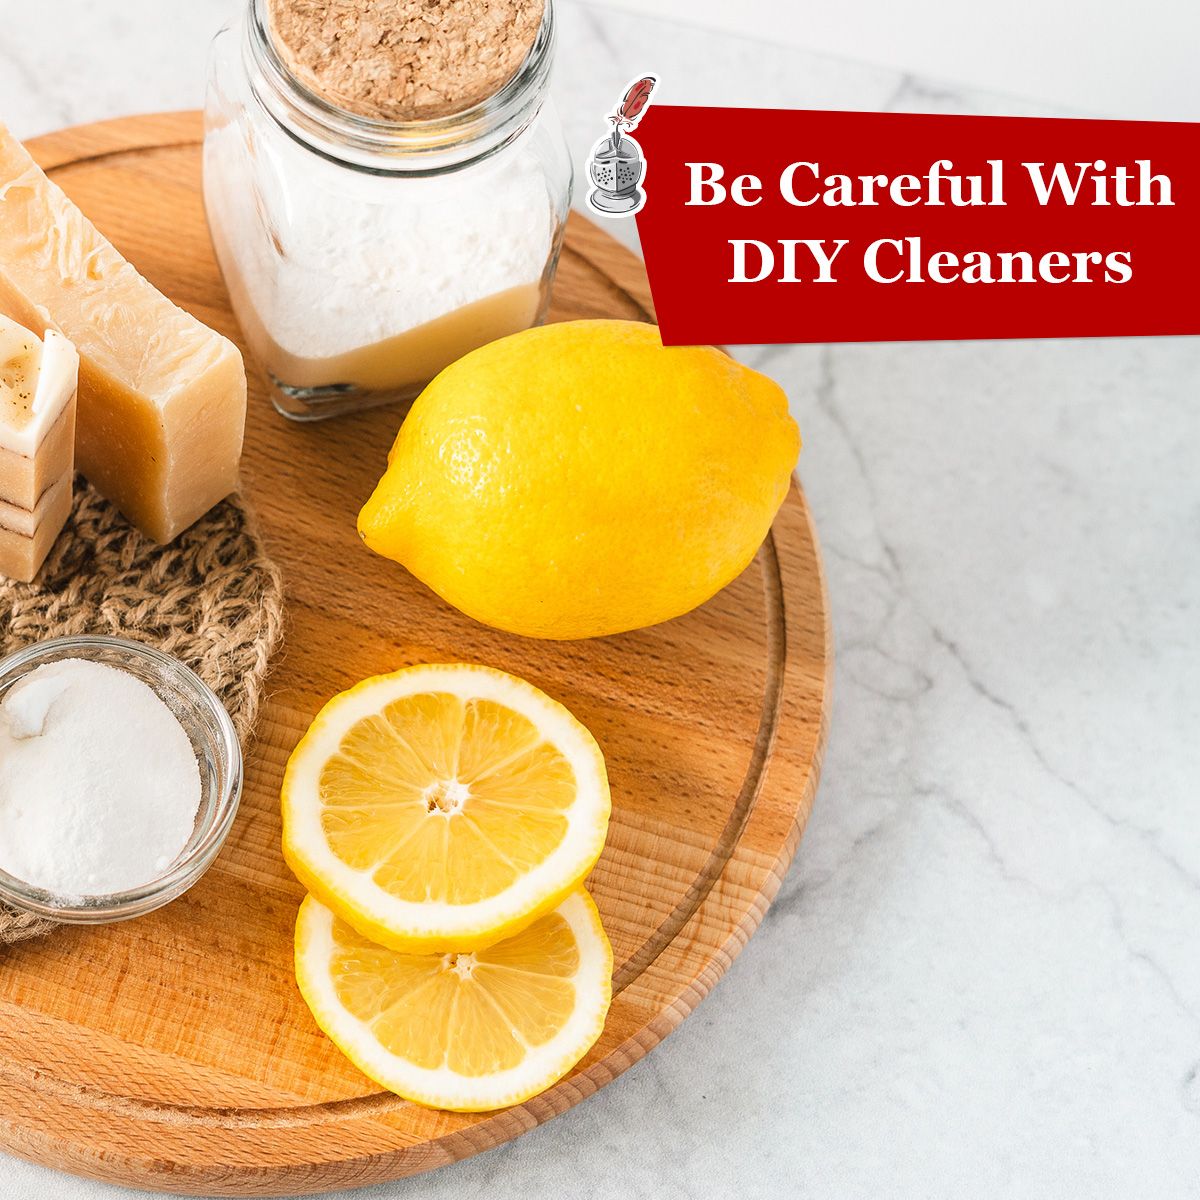 Be Careful With DIY Cleaners